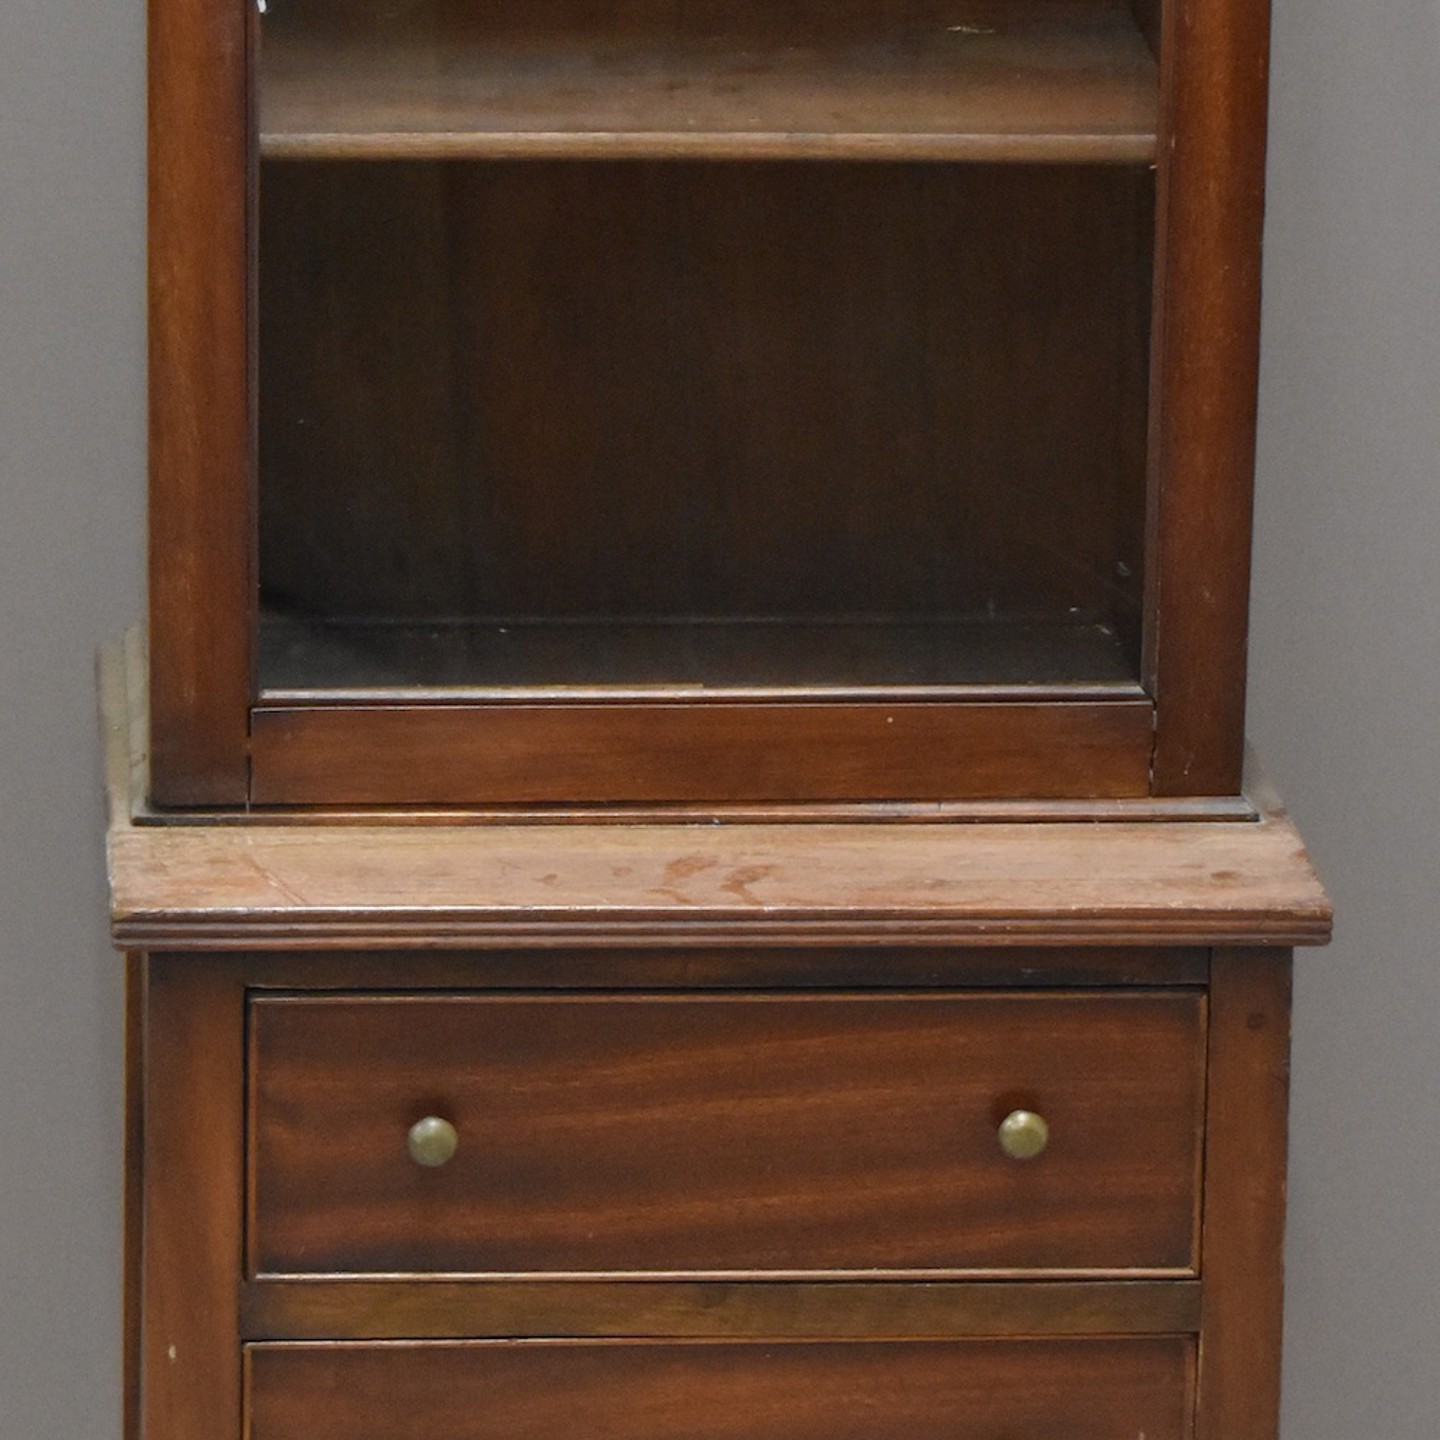 A Mahogany Glazed Allcocks Shop Advertising Cabinet. Sold For £130